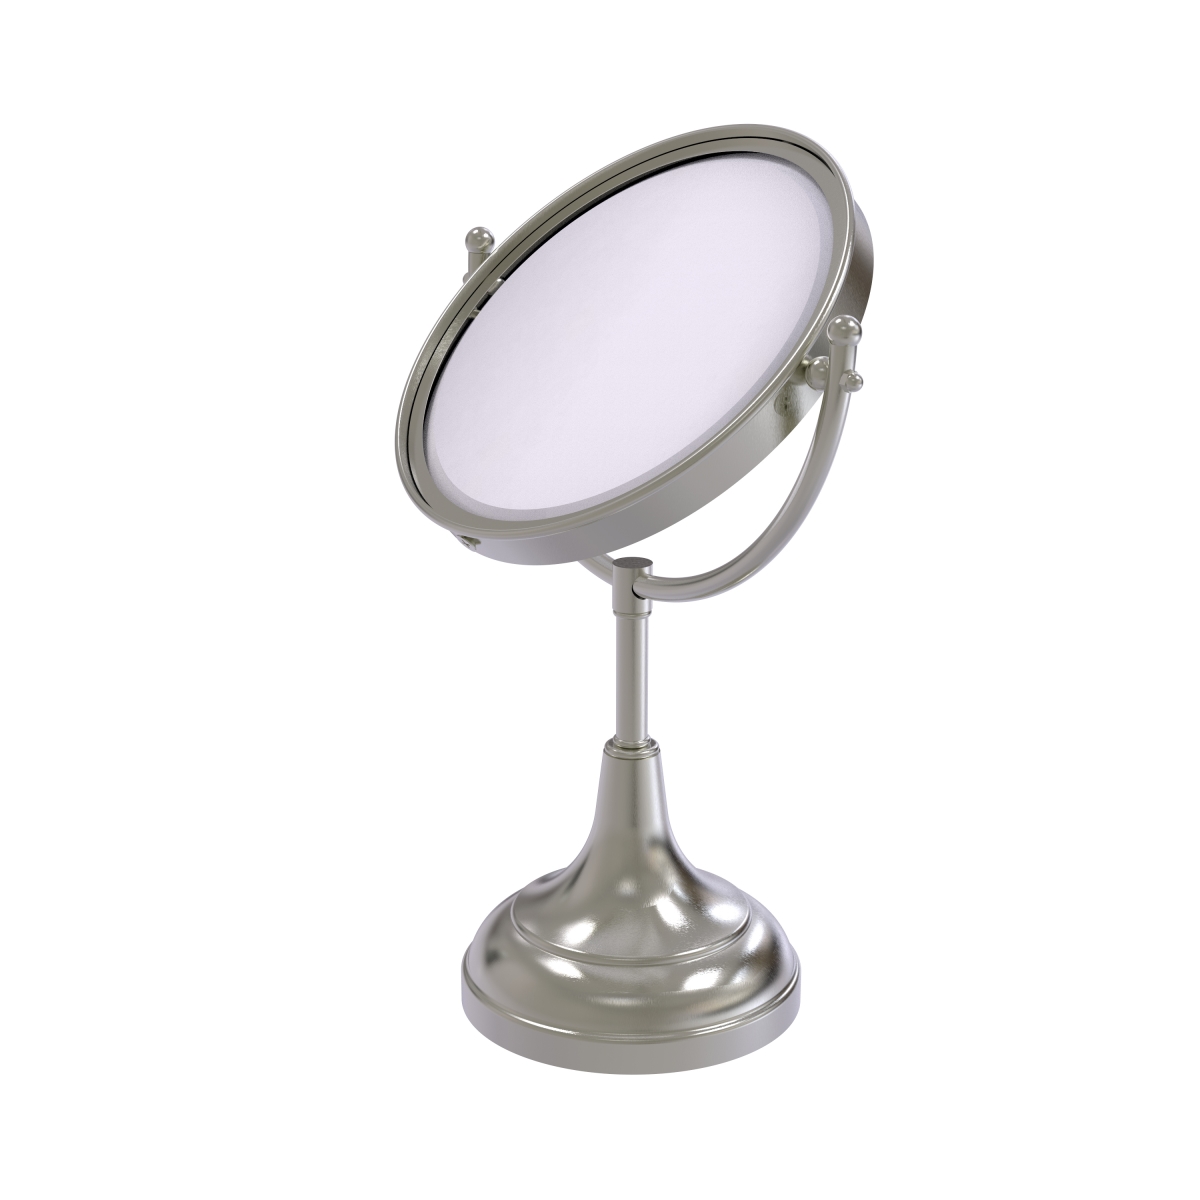 Picture of Allied Brass DM-2-2X-SN 8 in. Vanity Top Make-Up Mirror 2X Magnification, Satin Nickel - 15 x 8 x 8 in.